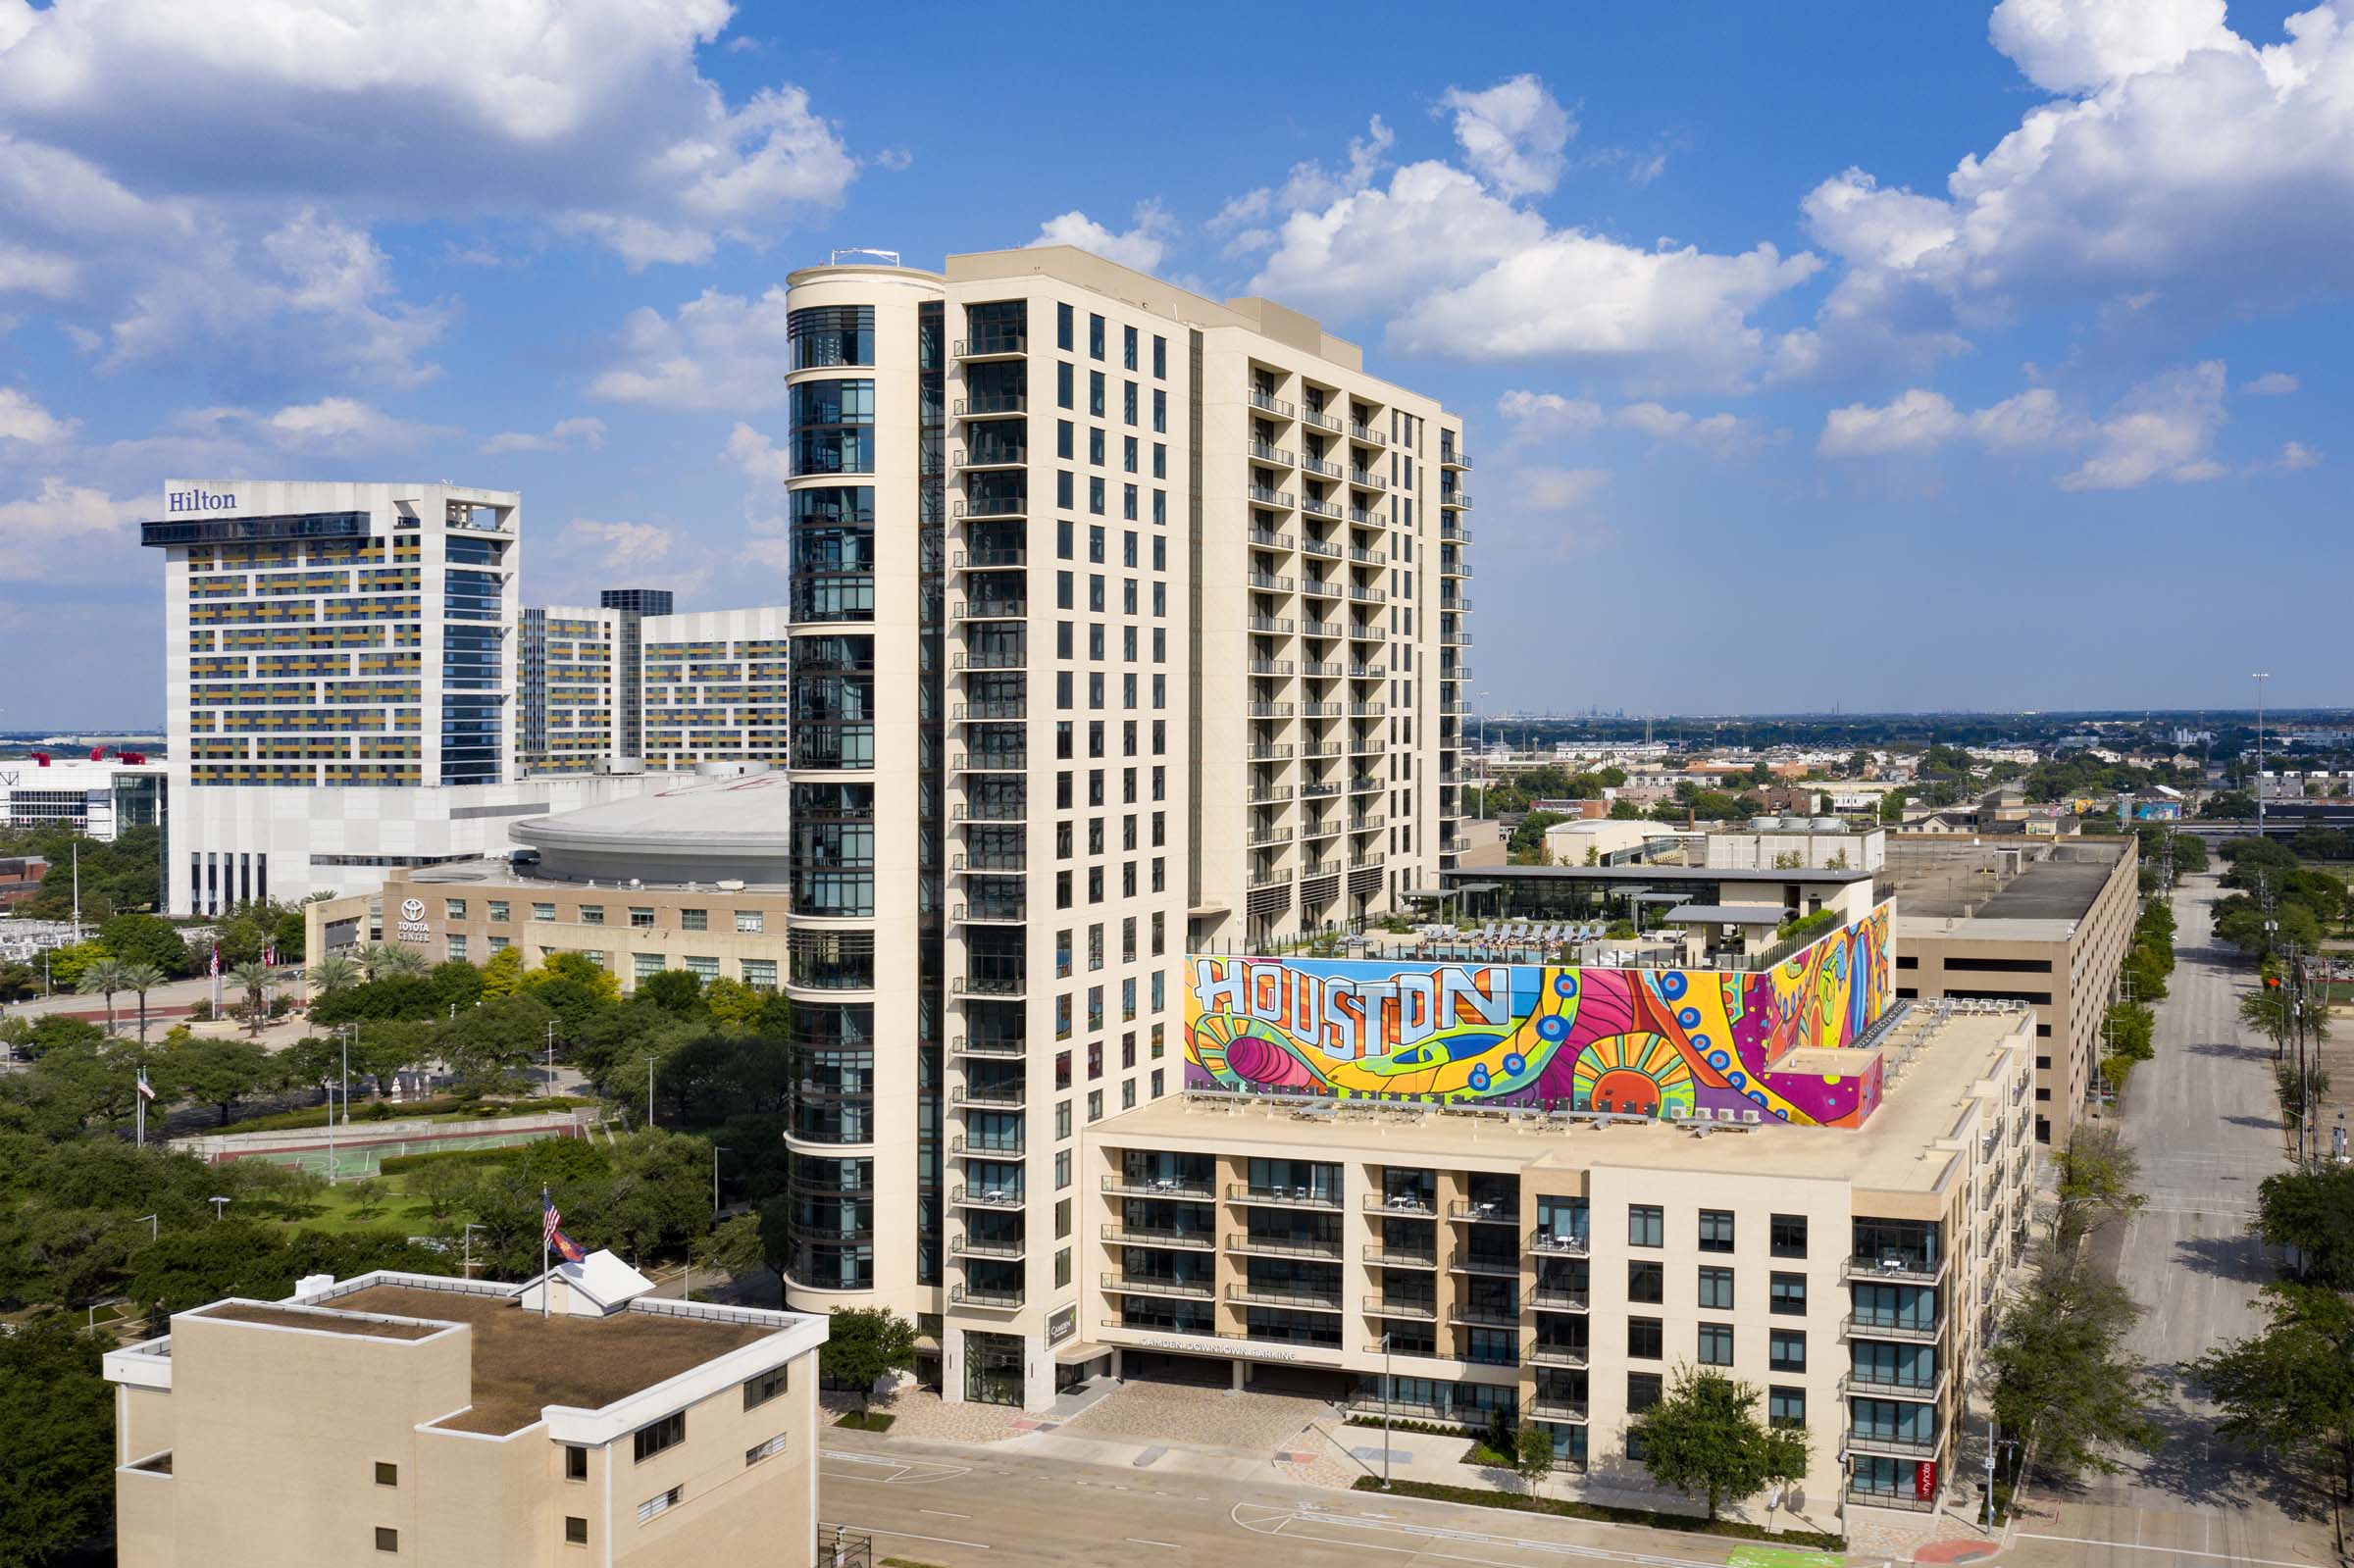 Exterior with mural and downtown